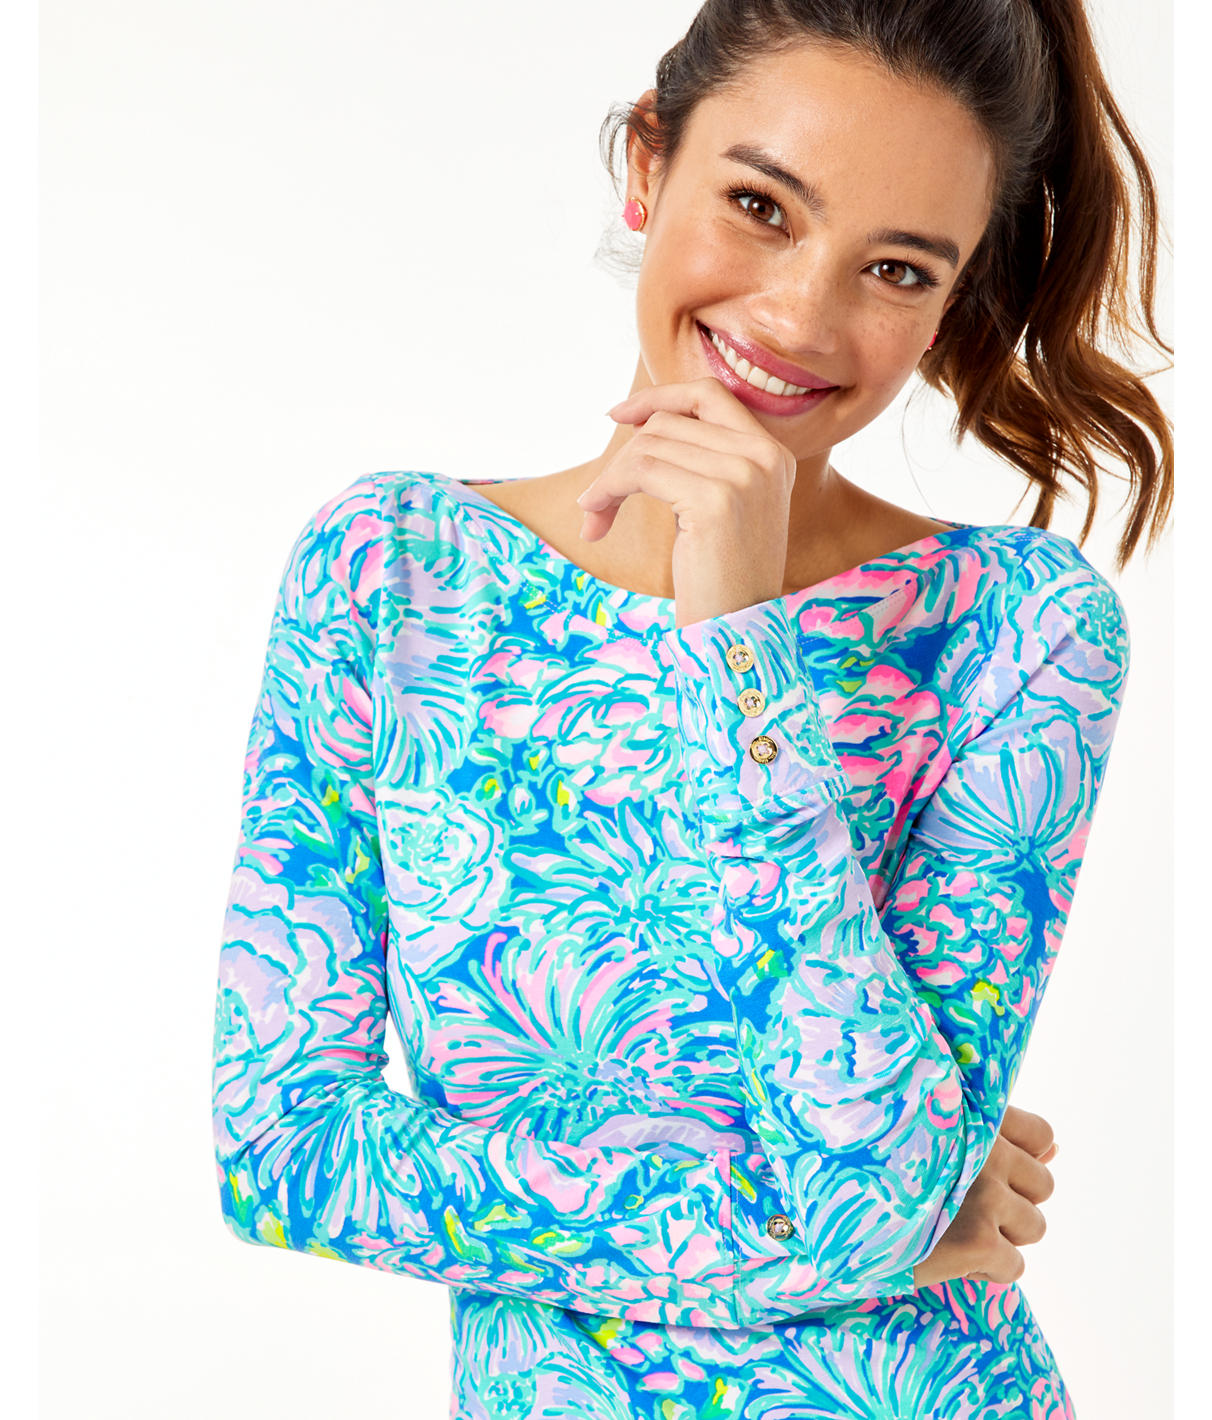 LILLY PULITZER WOMEN'S ALEAH TOP IN PINK SIZE XL, FLOCKING TO PARADISE - LILLY PULITZER IN PINK,003927